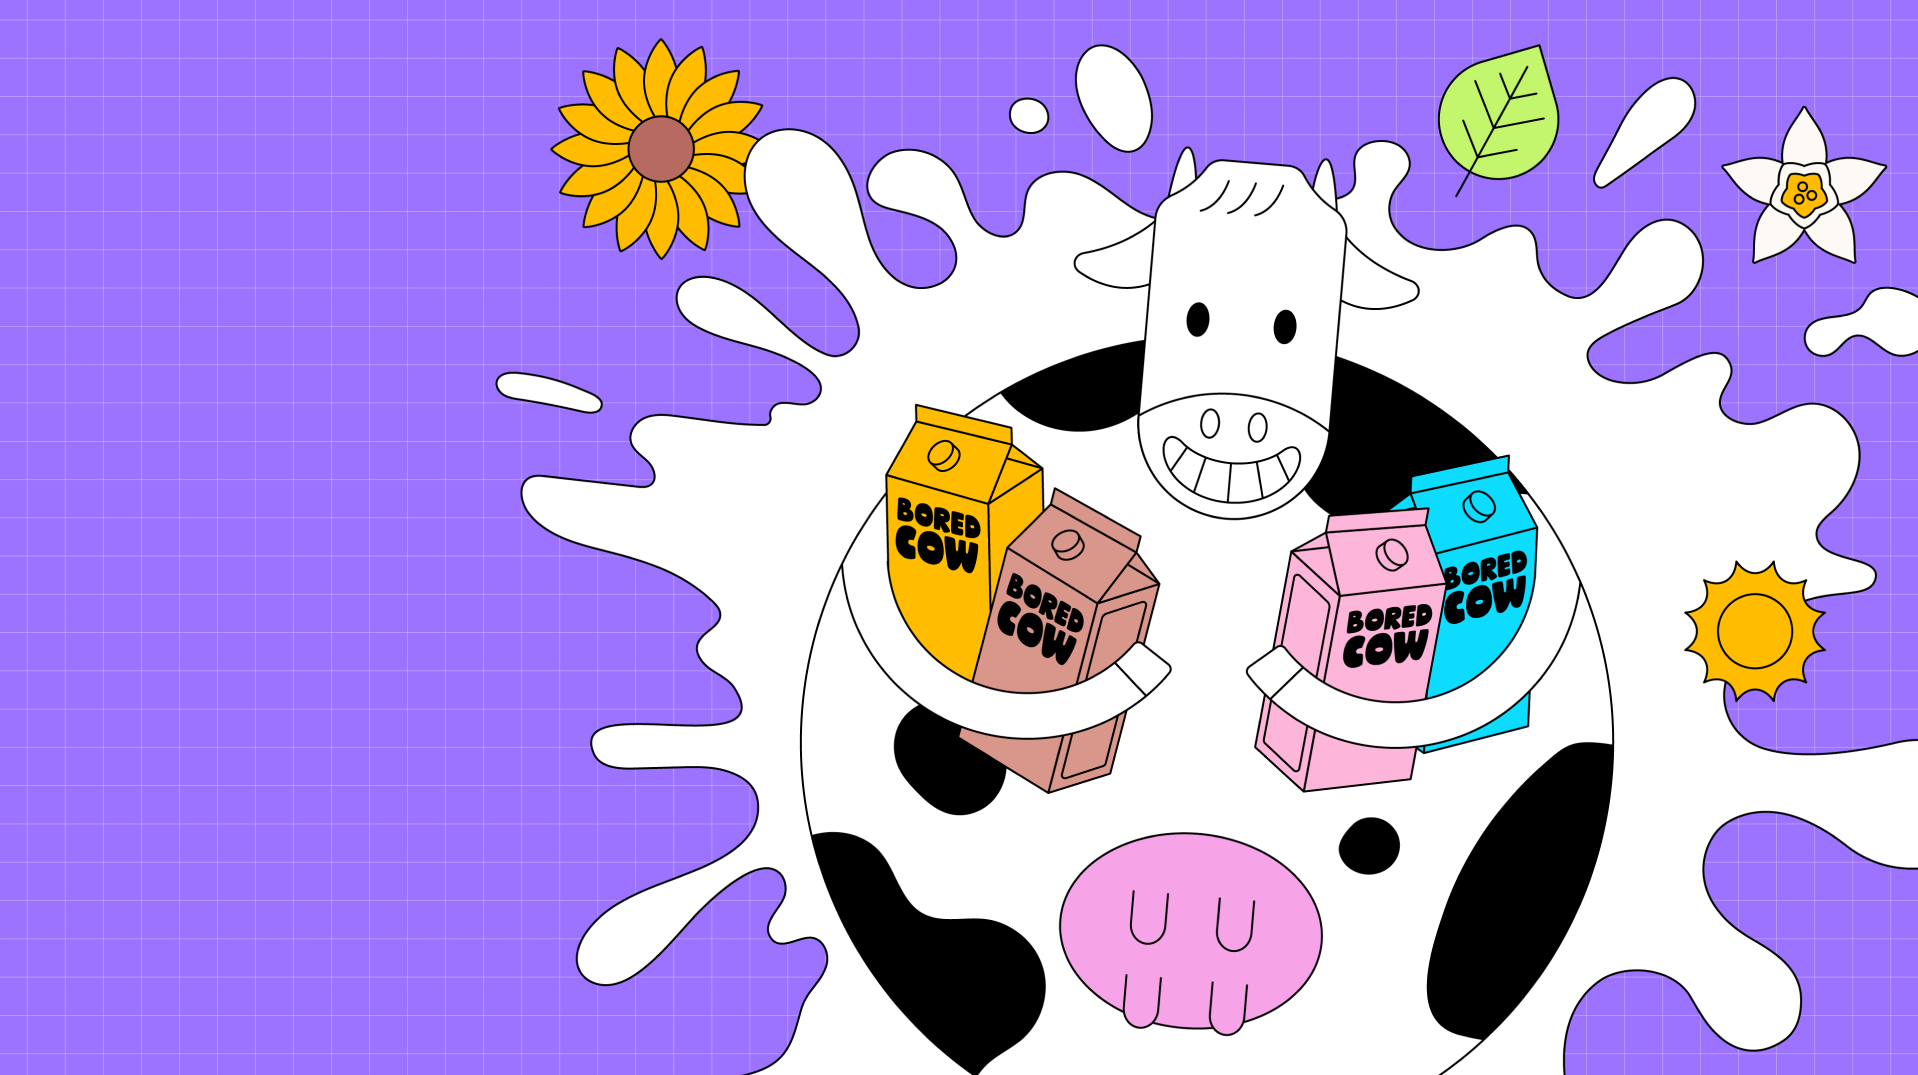 "A dairy cow is smiling and holding four cartons of Bored Cow animal-free dairy milk. She has a white milk splash behind her and a sunflower, leaf, vanilla flower and sun behind her. "